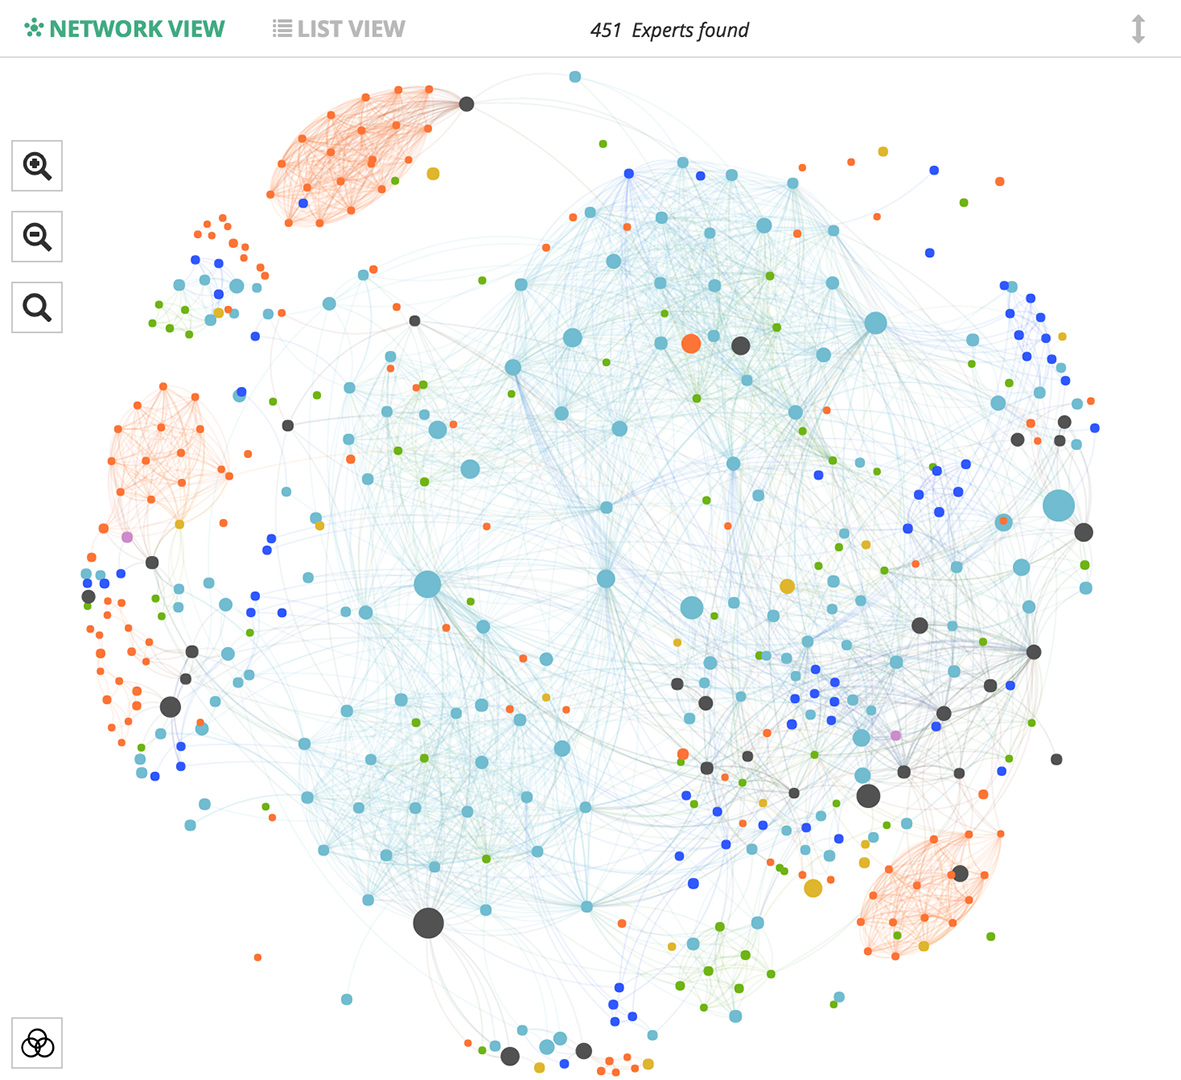 custom network graph visualization and analysis tool that eveals the connections across previously unlinked data sets